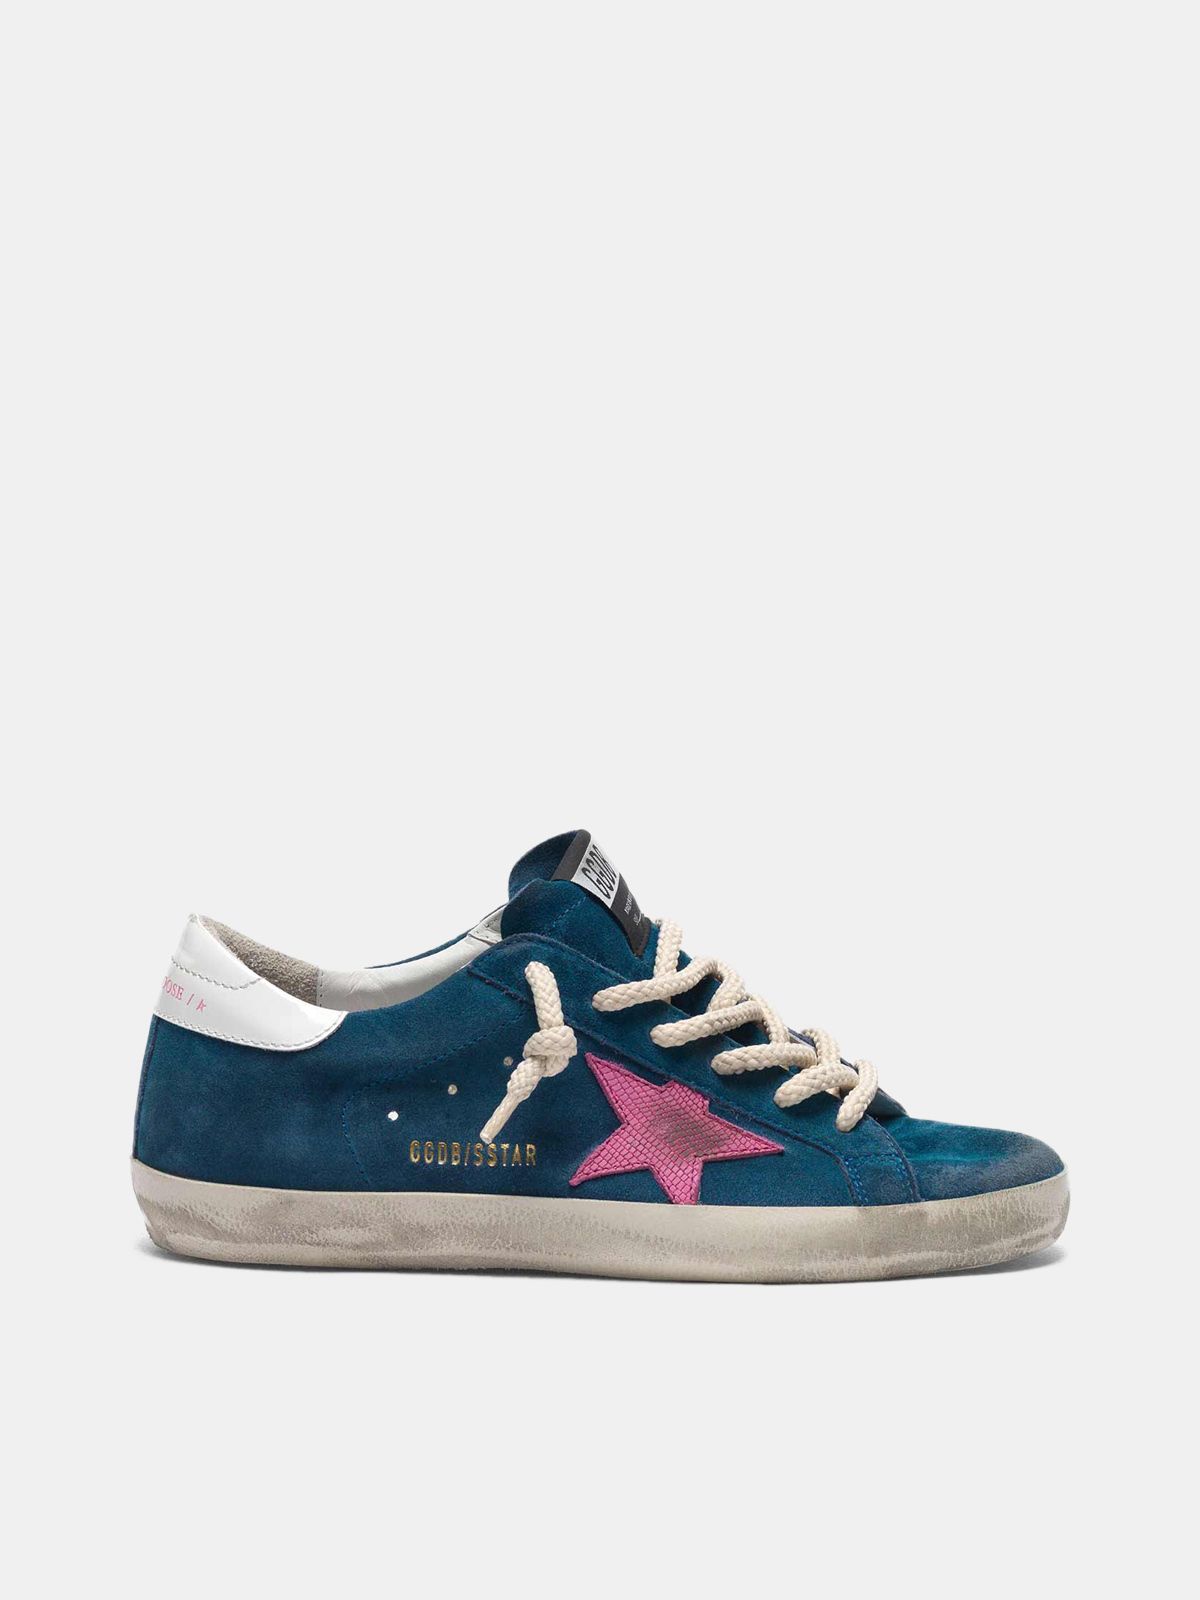 golden goose with a pink suede Super-Star star in blue sneakers